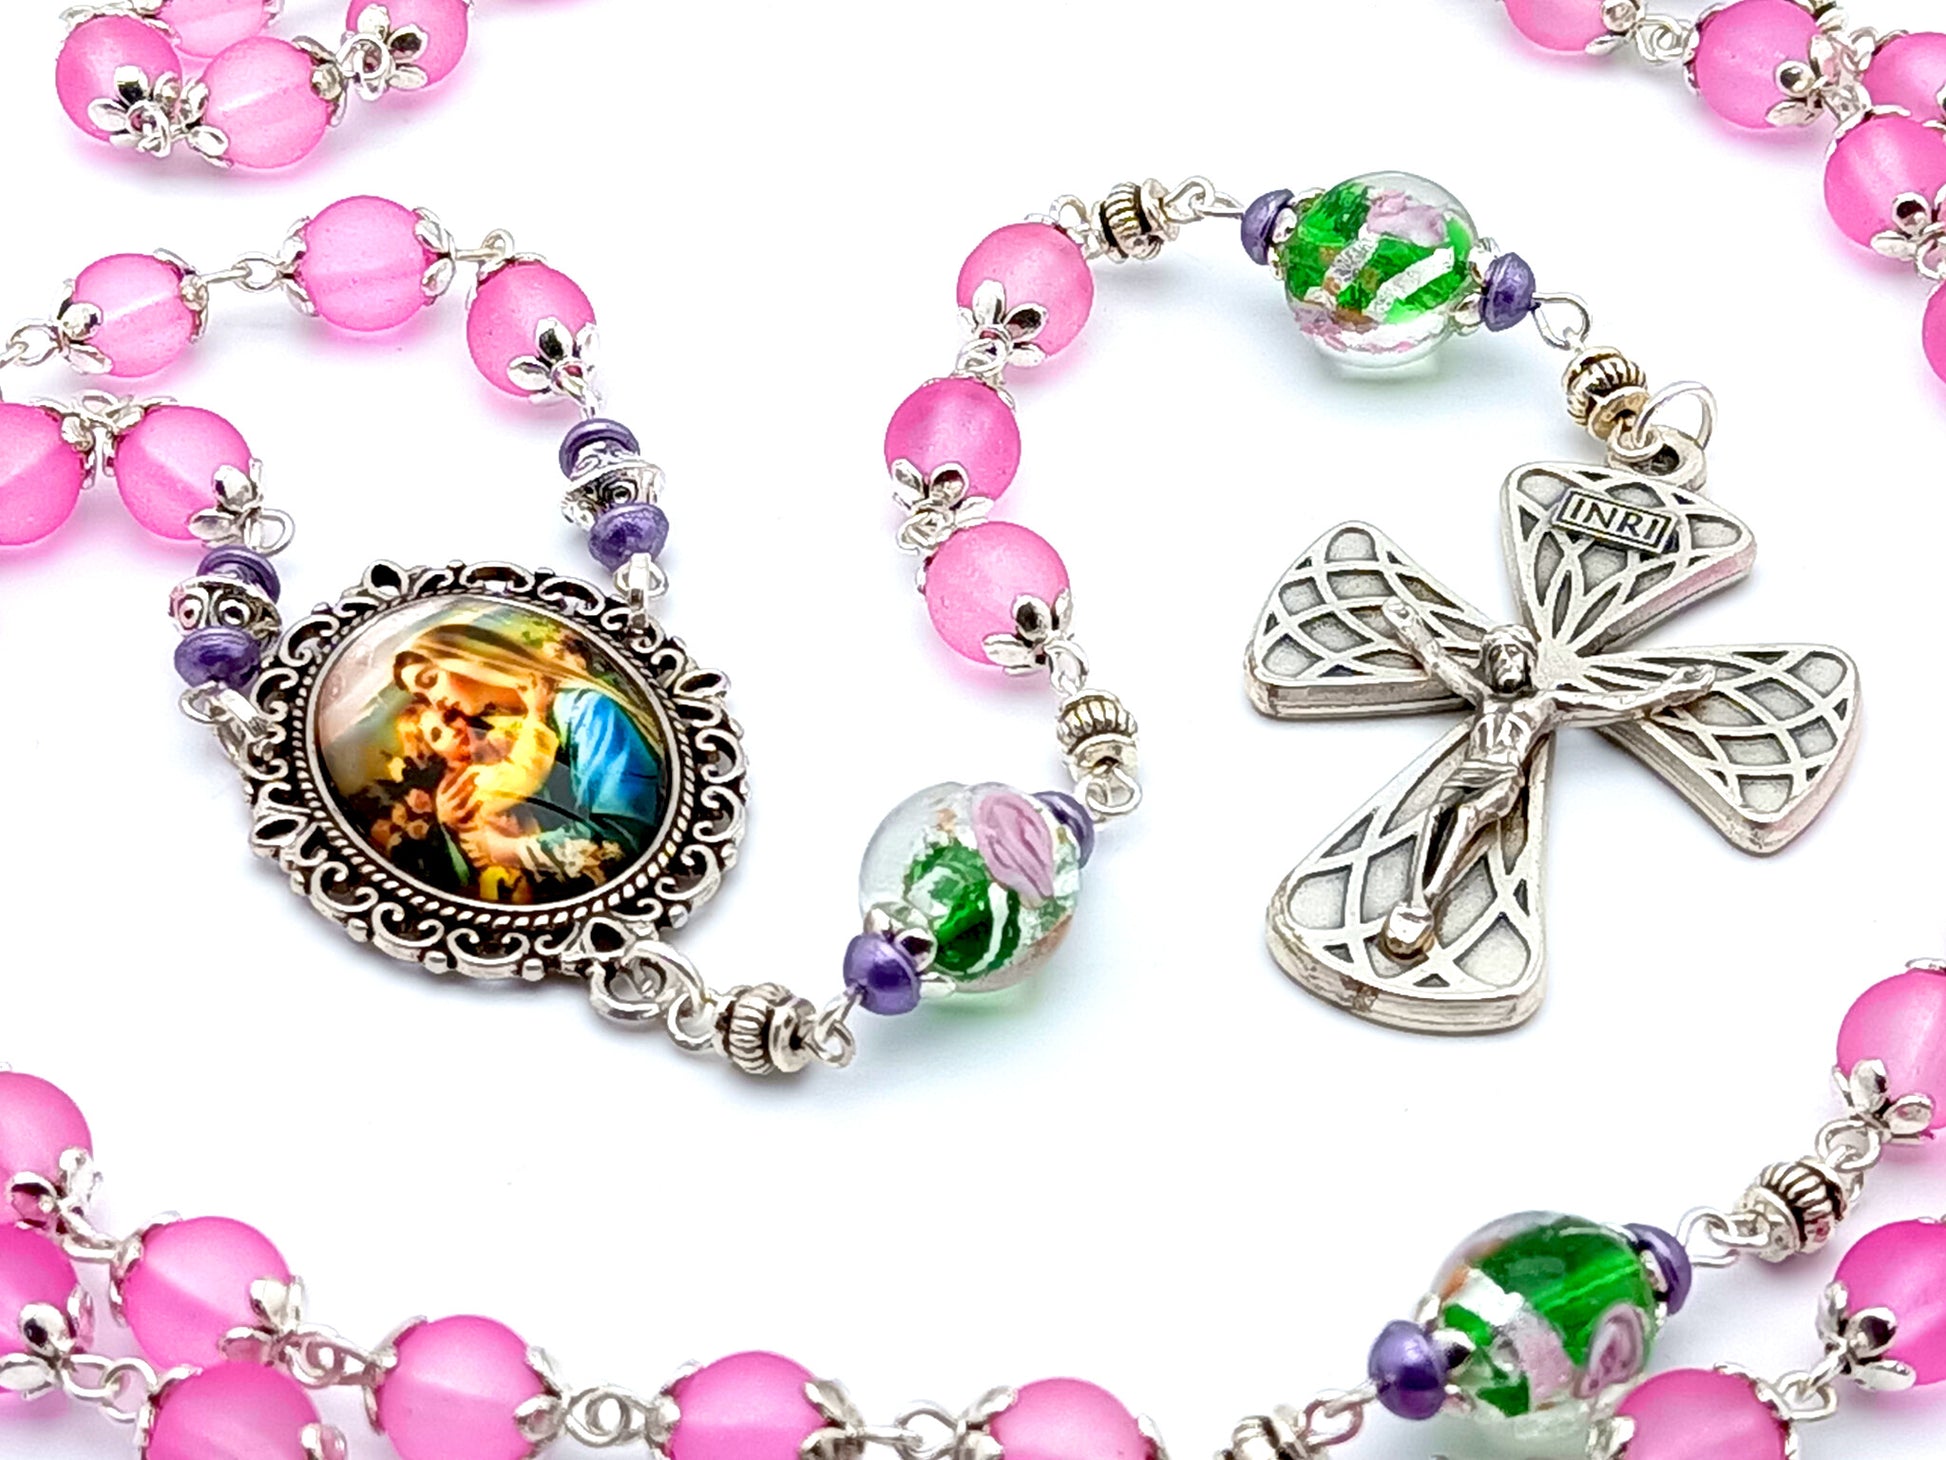 Virgin Mary unique rosary beads with pink and floral glass beads, silver harlequin crucifix and picture centre medal.